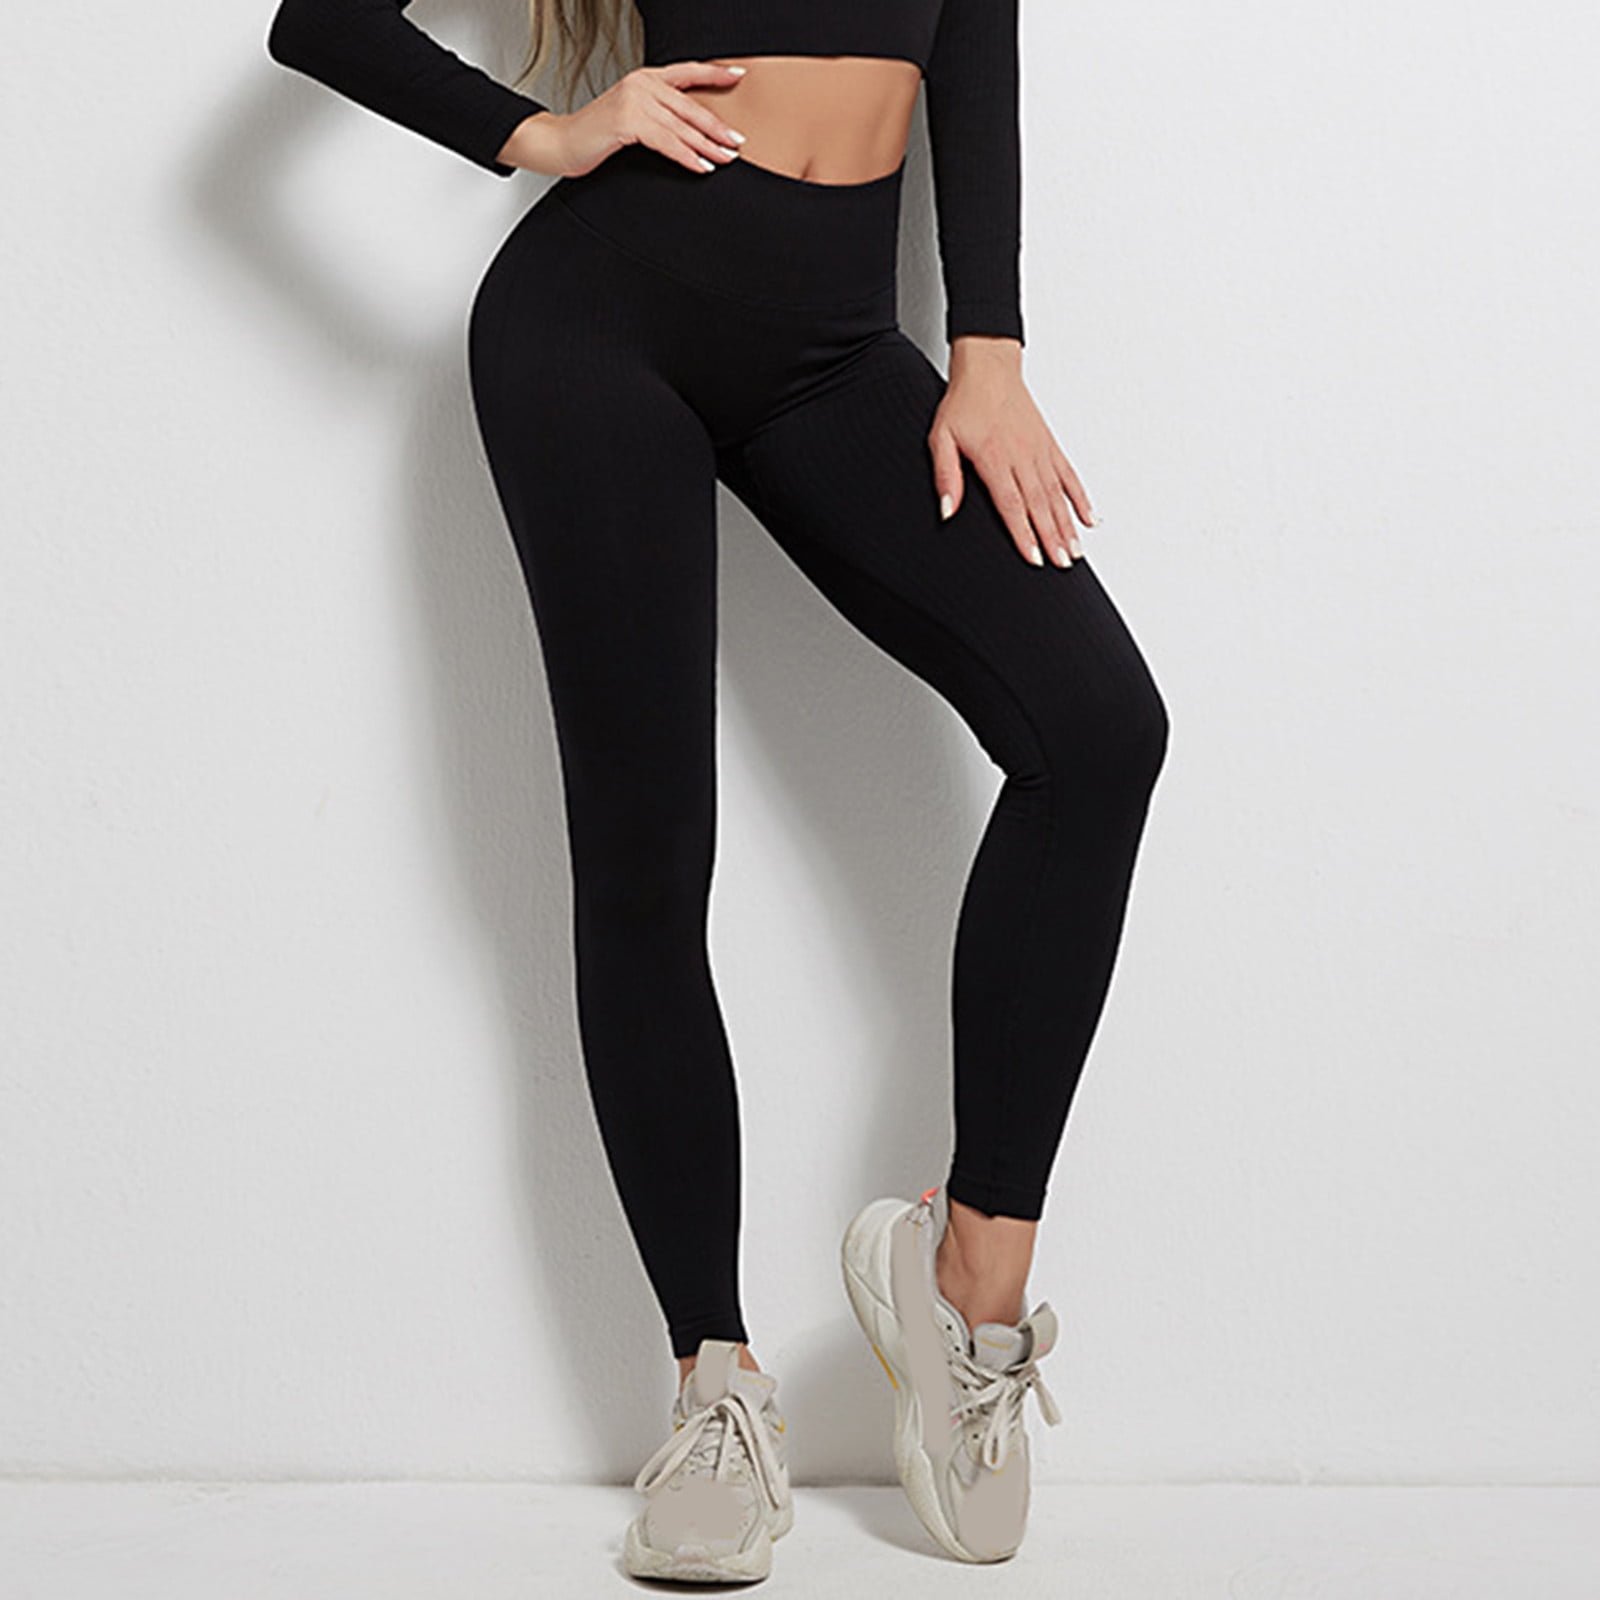 Buy LZYVOO High Waisted Yoga Leggings with Pockets, Tummy Control Workout Pants  for Women-Black-L at